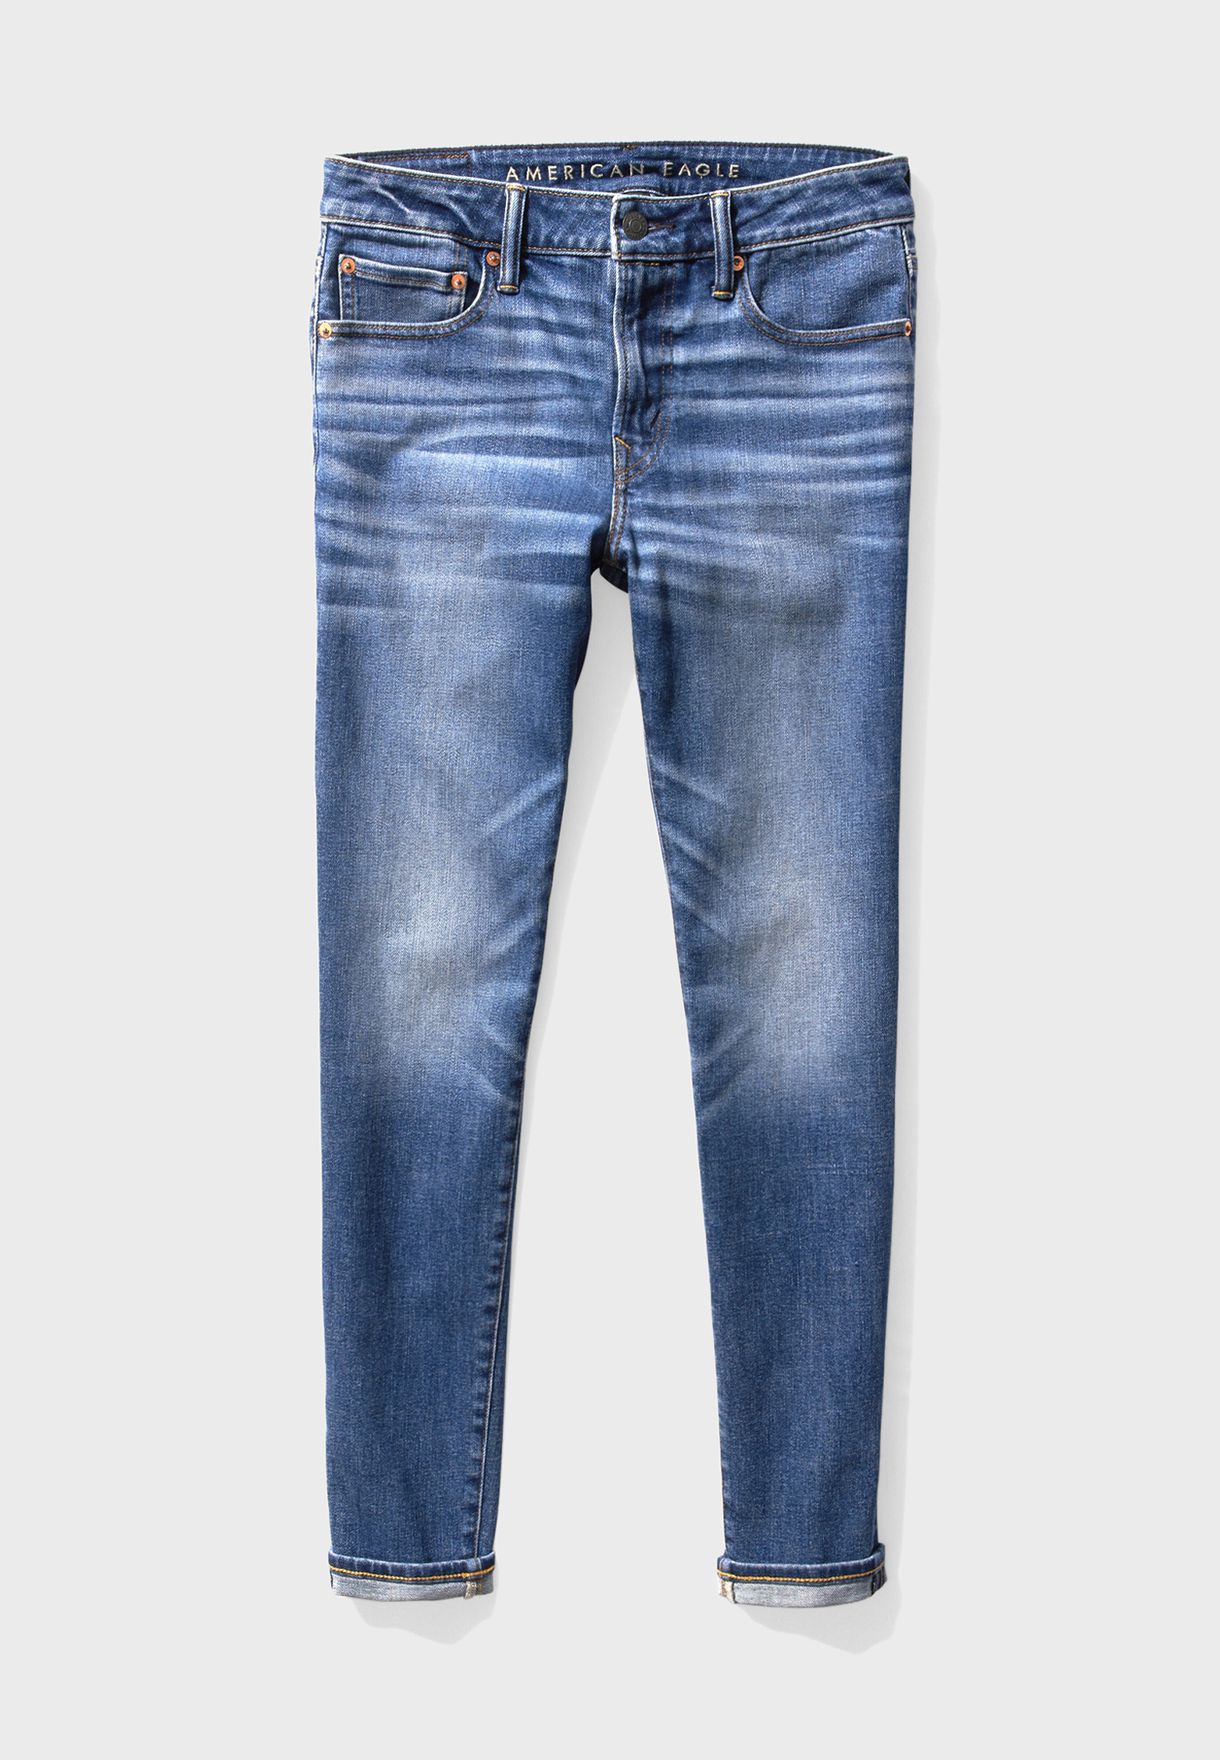 Mid Wash Skinny Fit Jeans